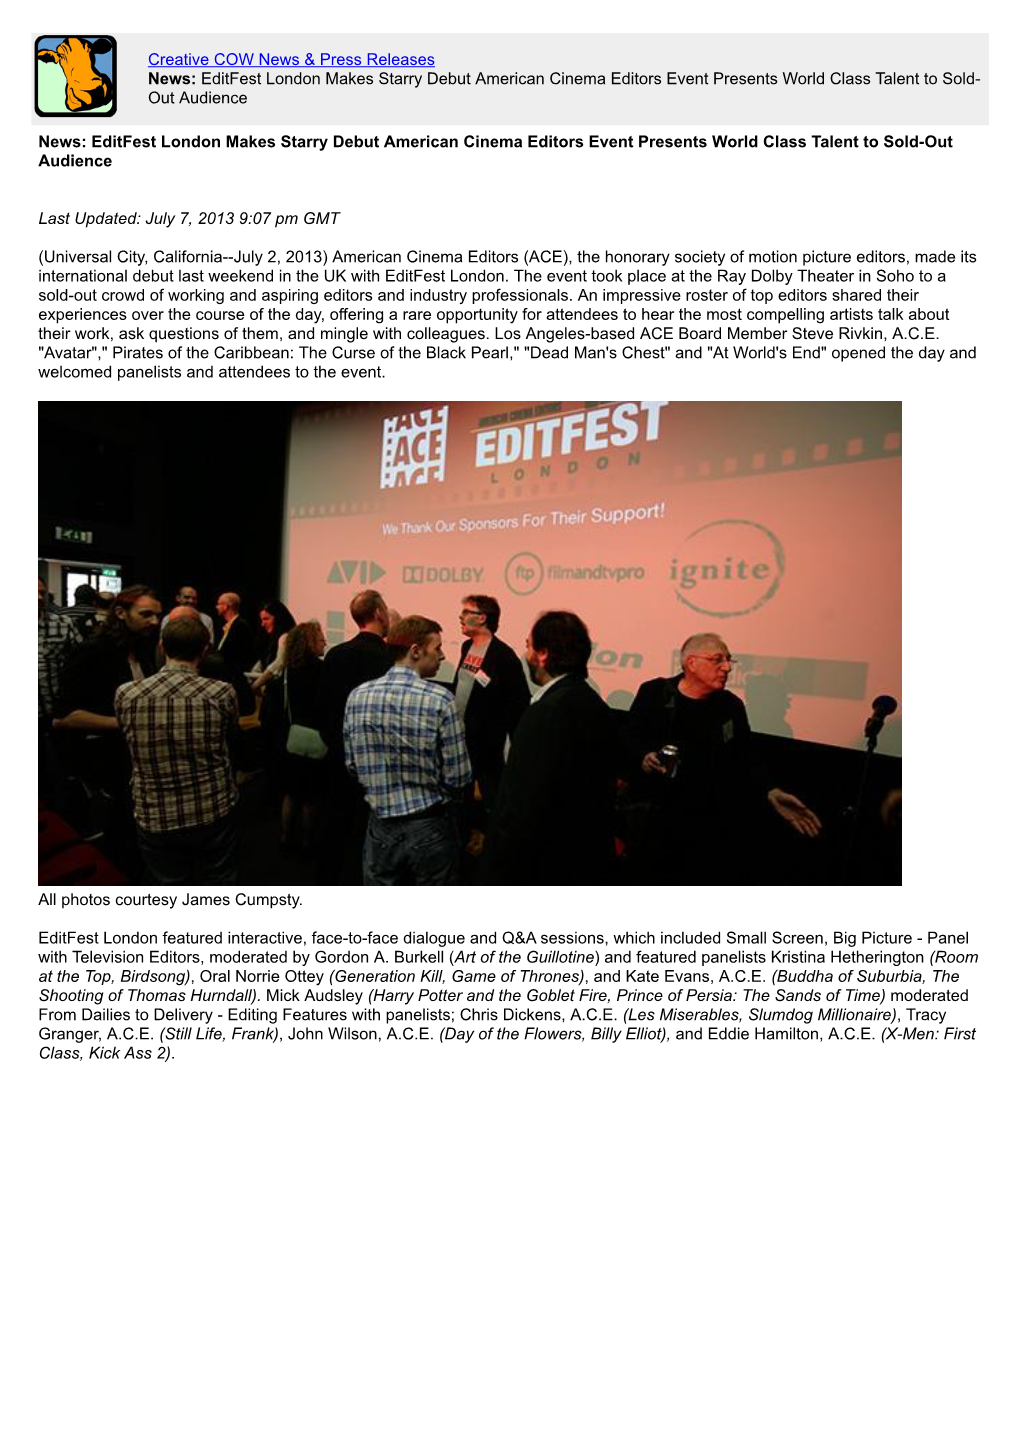 News: Editfest London Makes Starry Debut American Cinema Editors Event Presents World Class Talent to Sold- out Audience